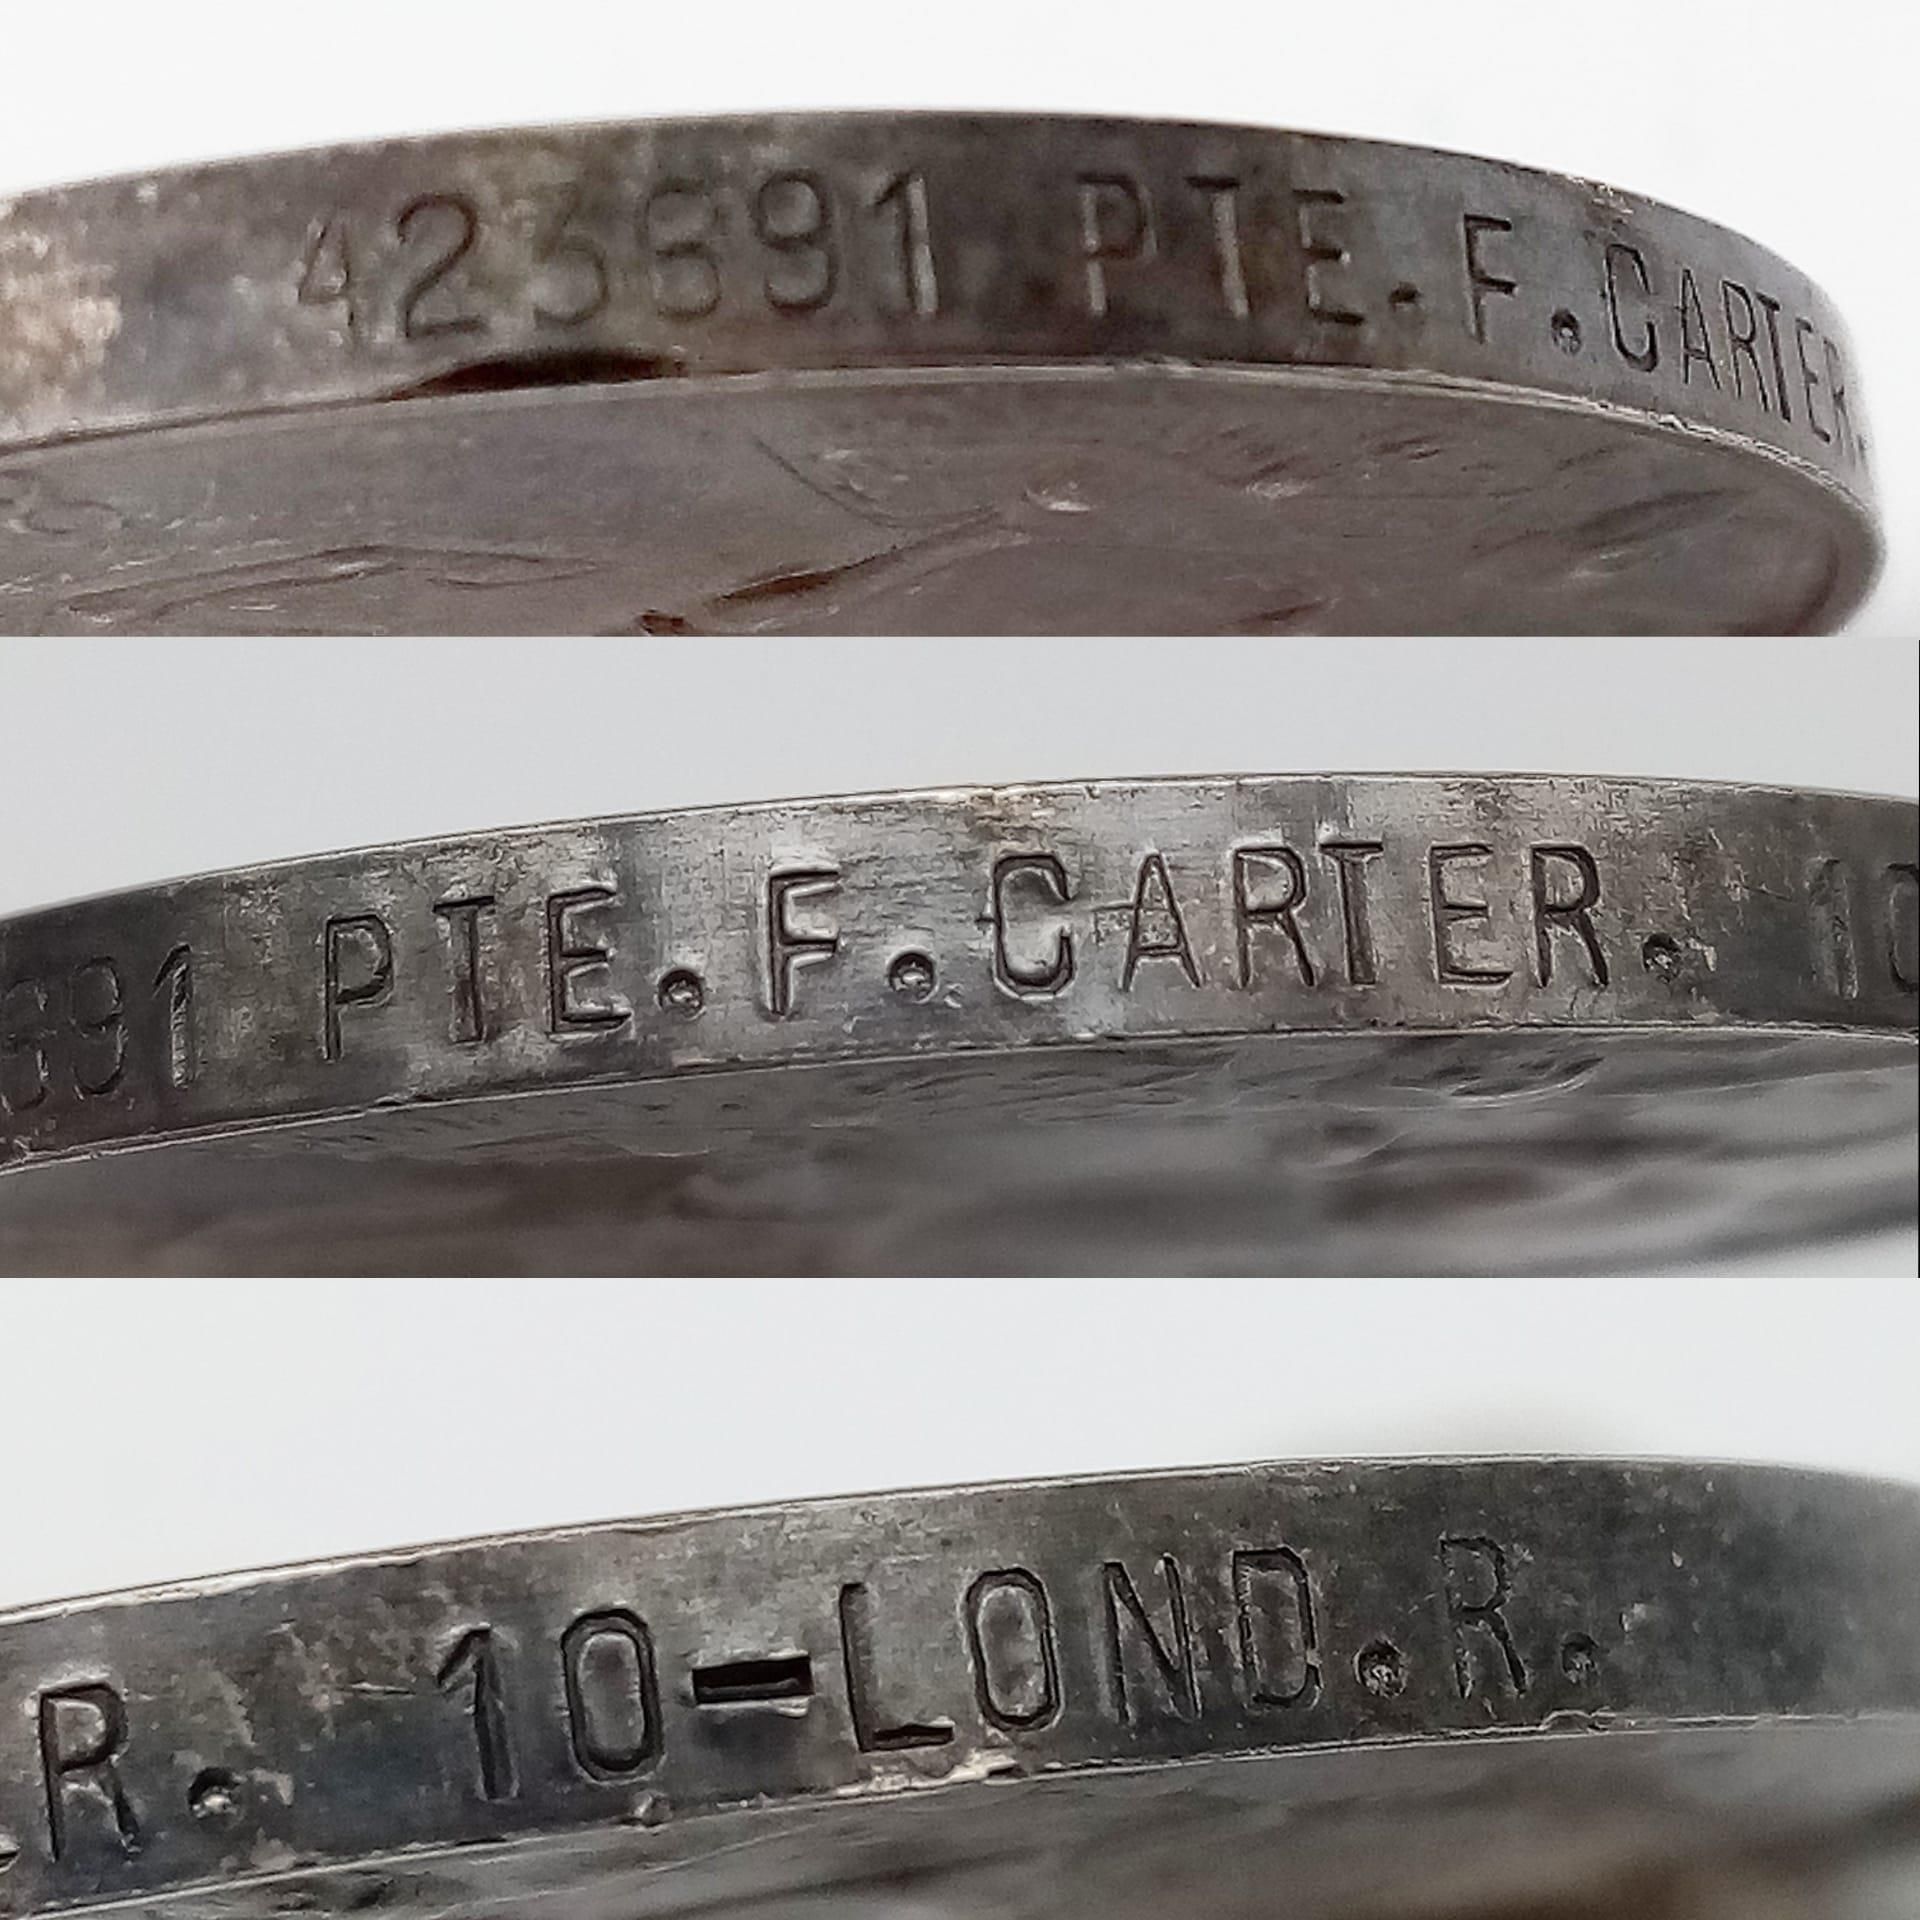 WW1 Medal Duo and Death Penny to 423691 Pte. F. Carter of the 10th Bn London Regiment, who was - Image 7 of 7